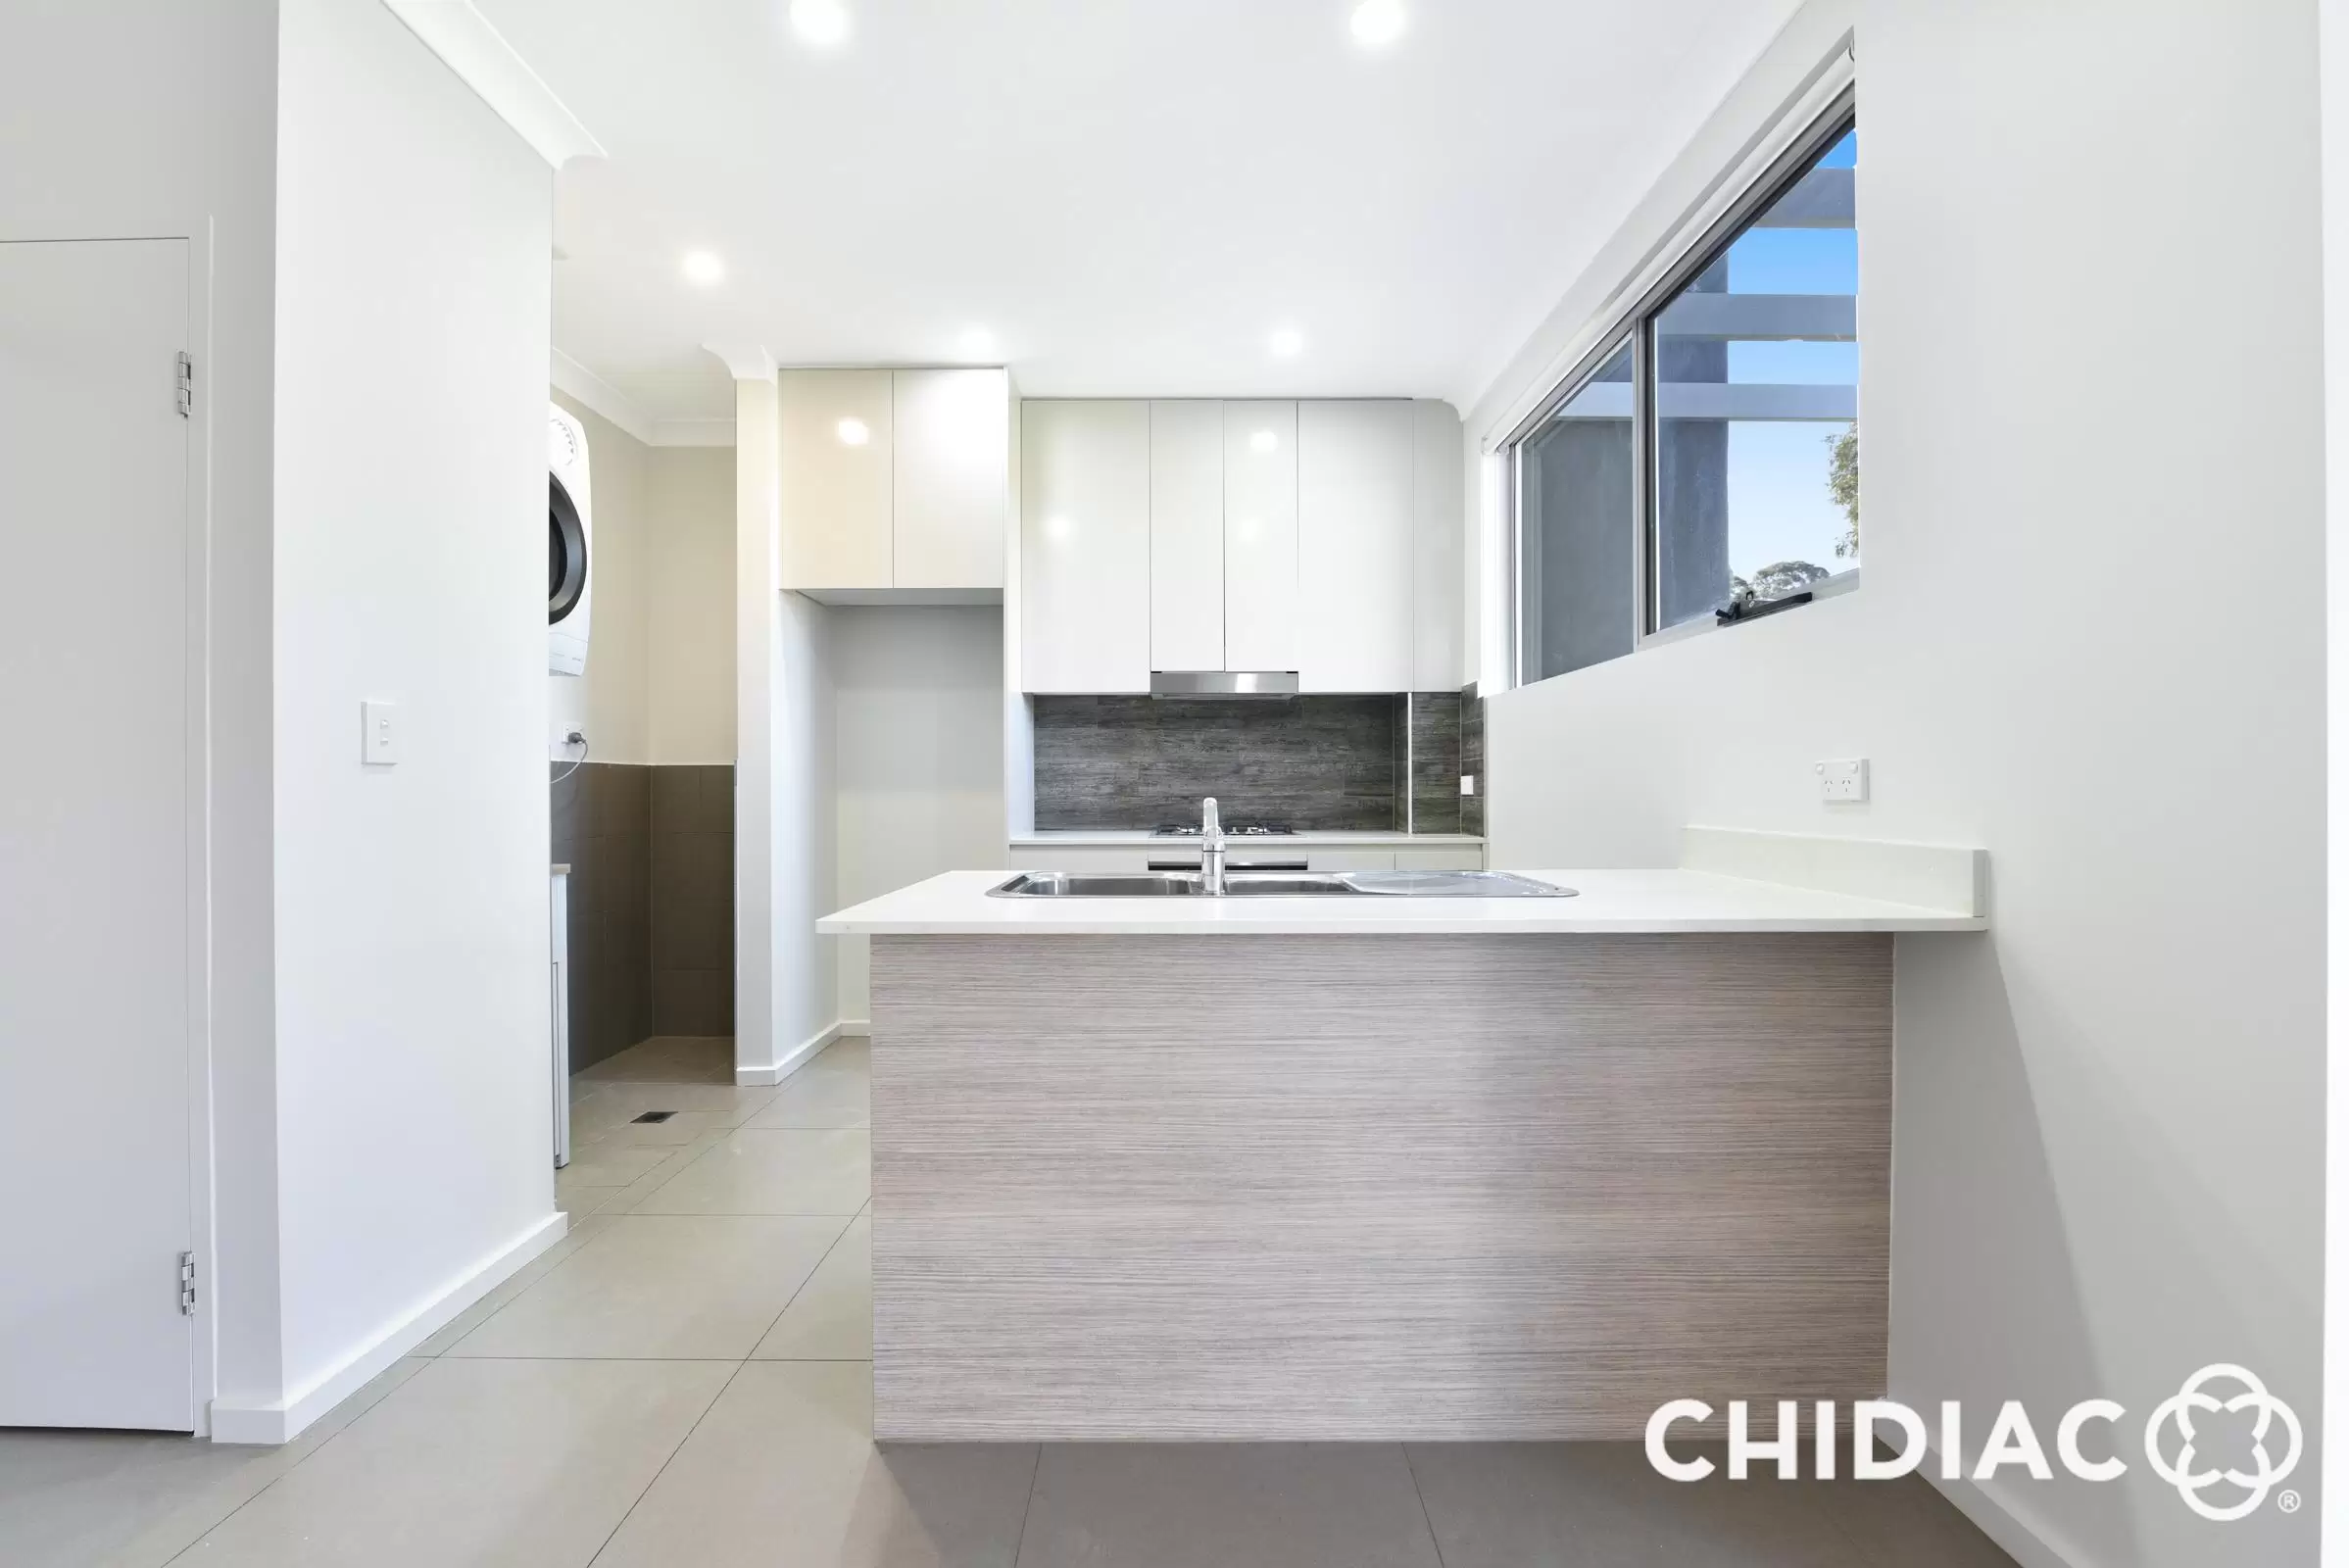 13/22 Burbang Crescent, Rydalmere Leased by Chidiac Realty - image 4